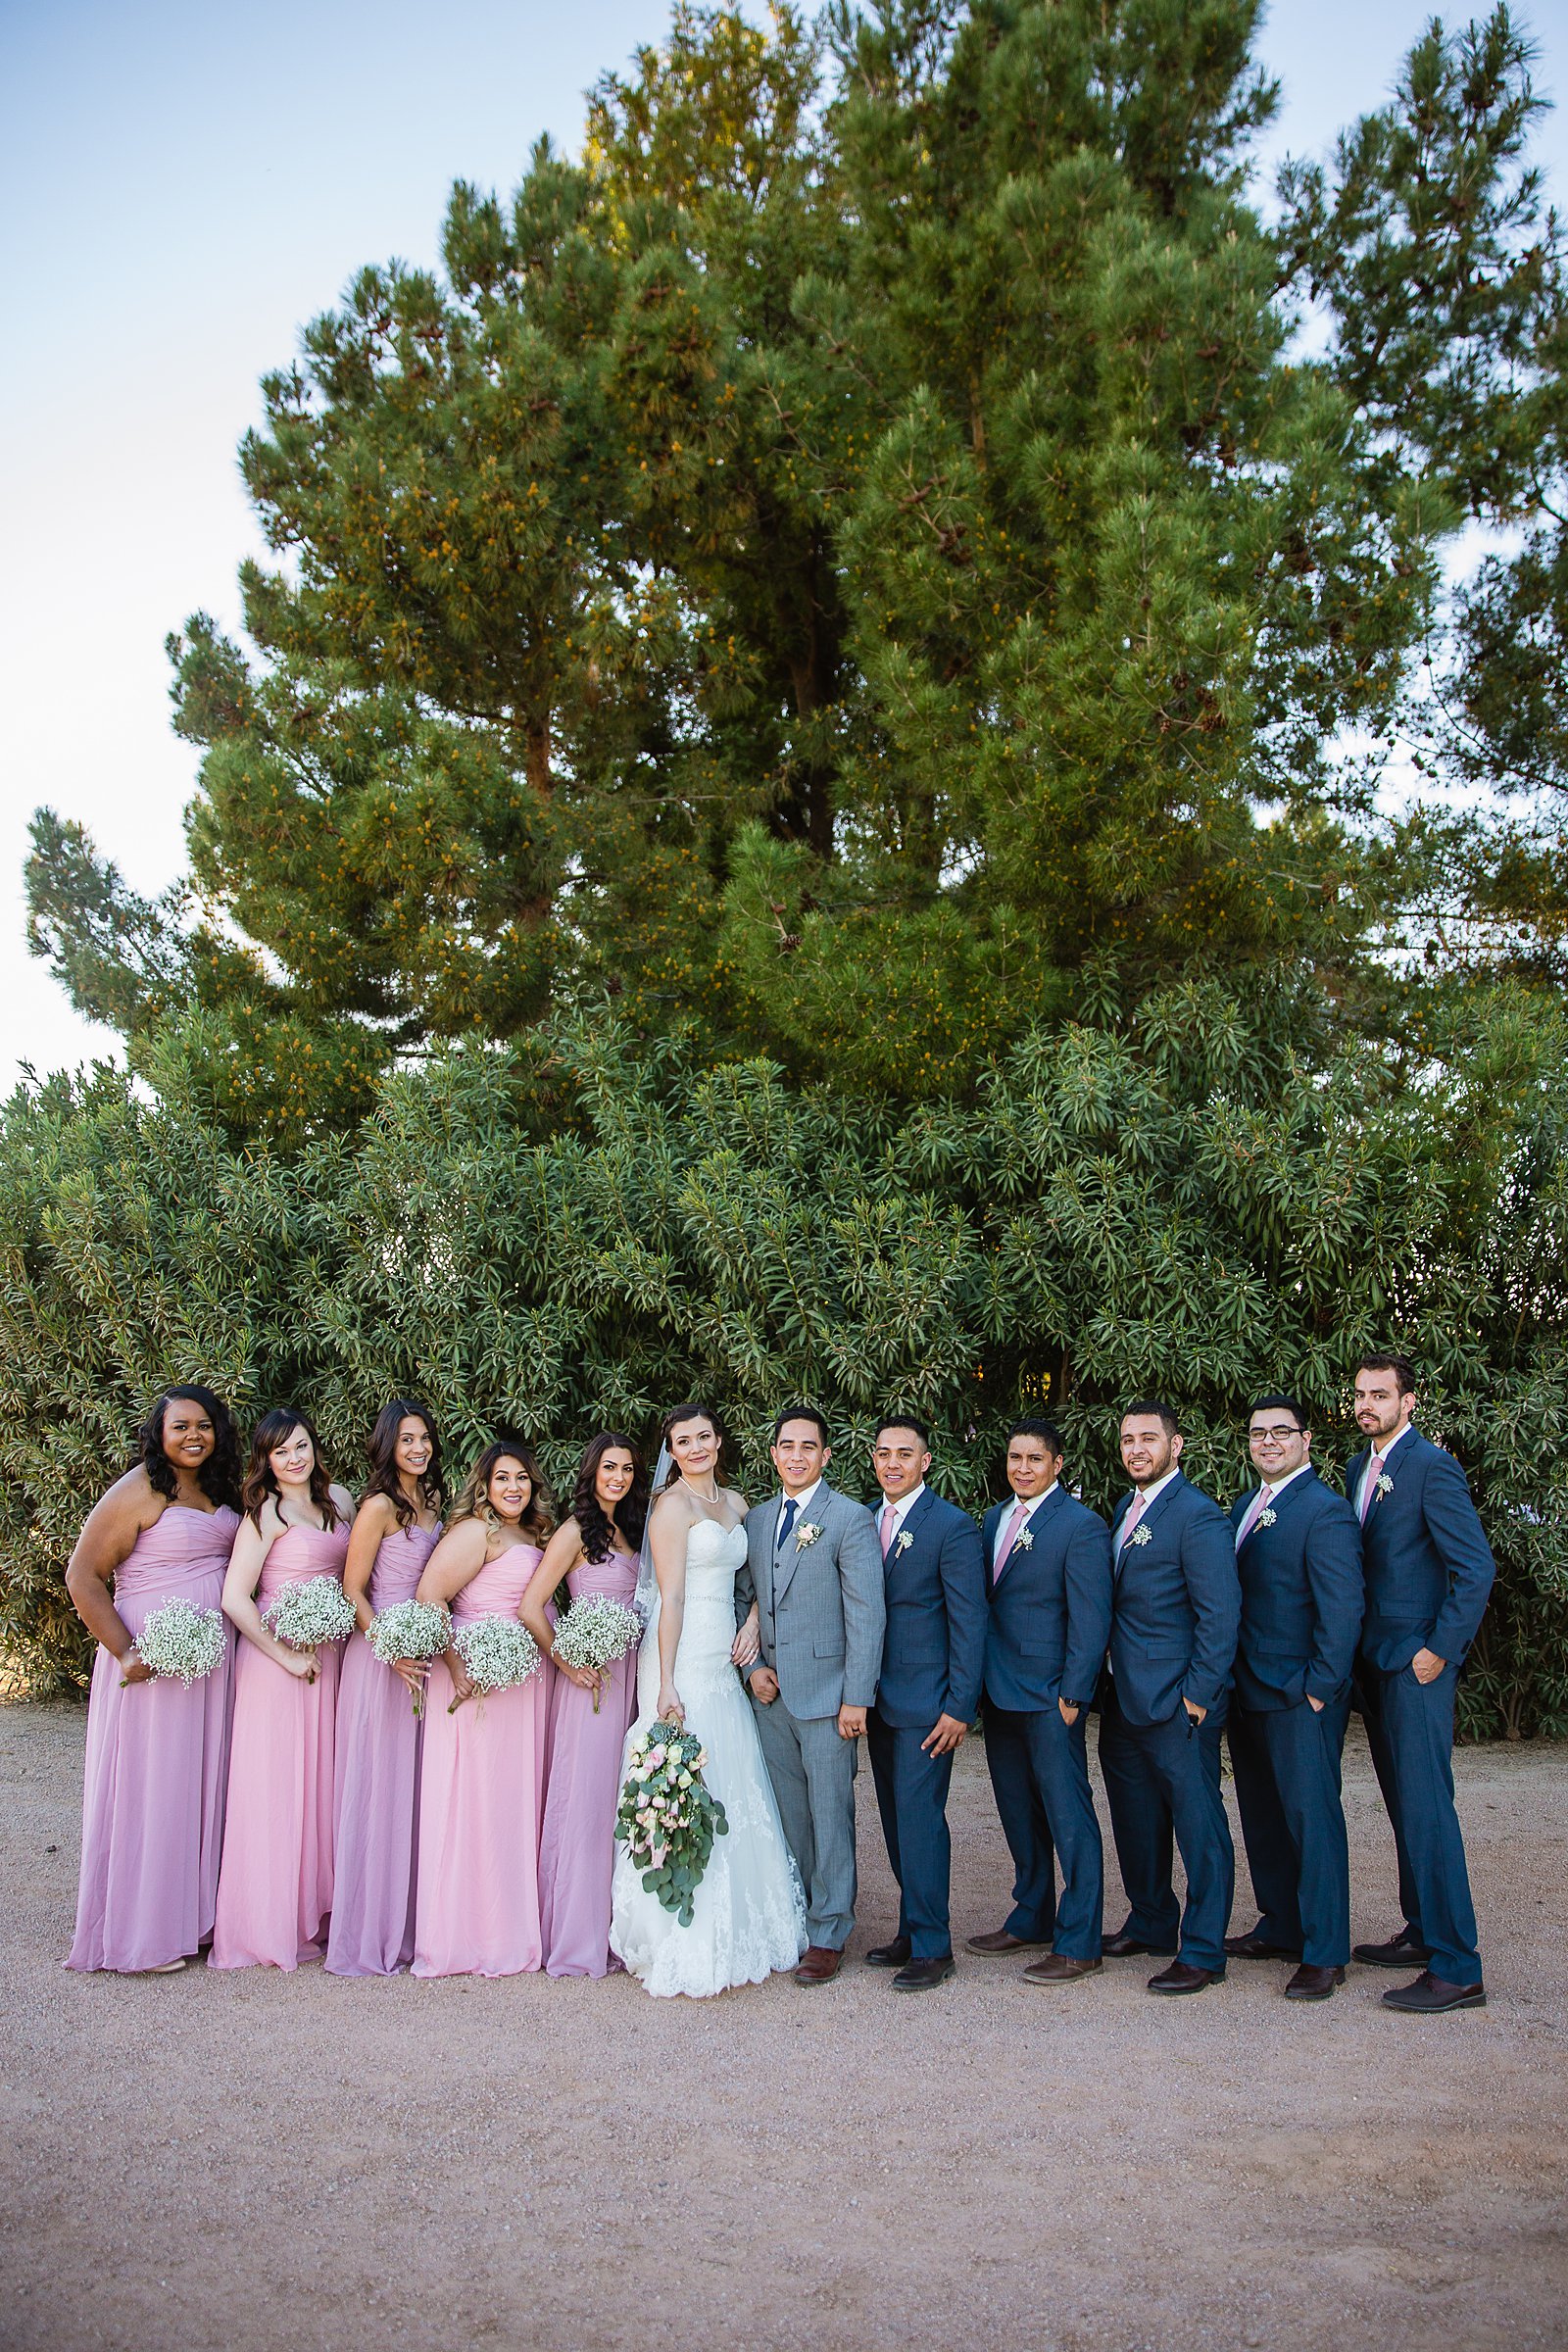 Bridal party together at a Schnepf Farms wedding by Arizona wedding photographer PMA Photography.